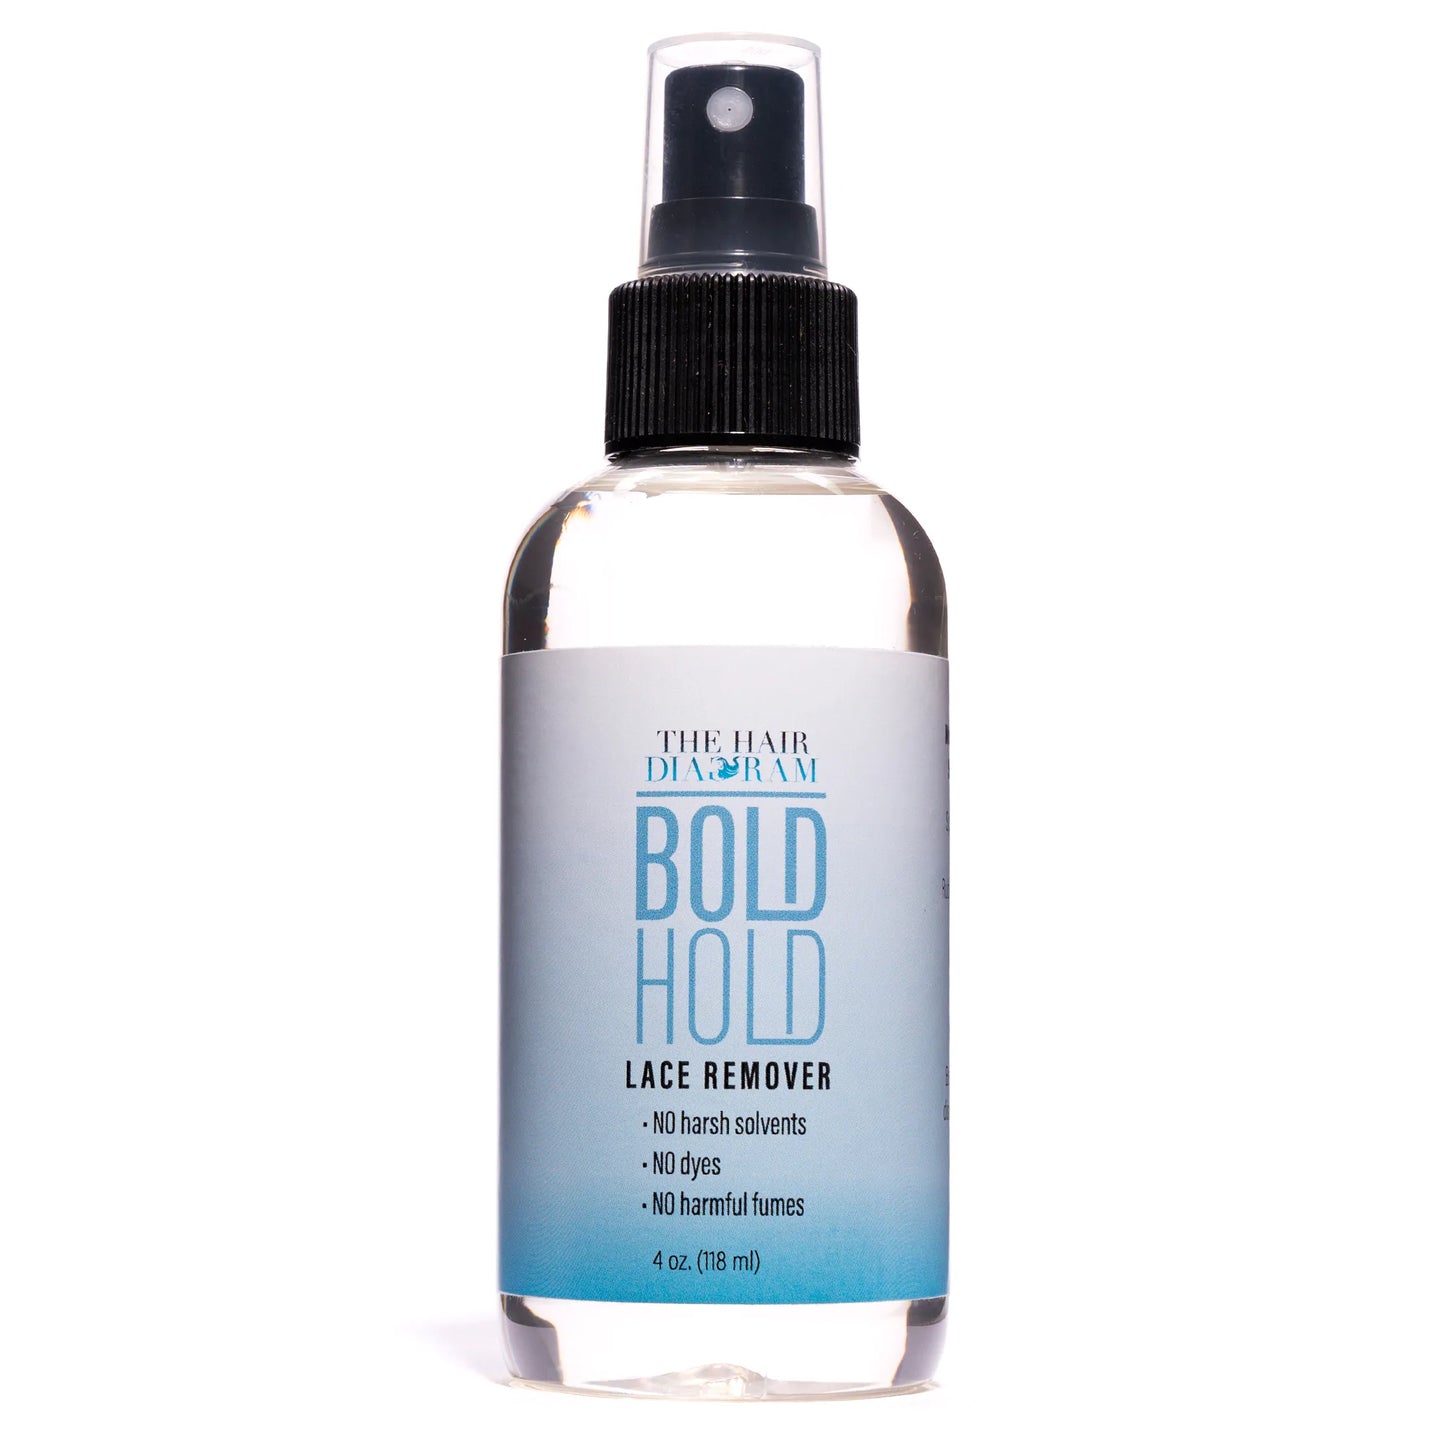 BOLD HOLD EXTREME CREME RELOADED & BOLD HOLD REMOVER - COMBO PACK